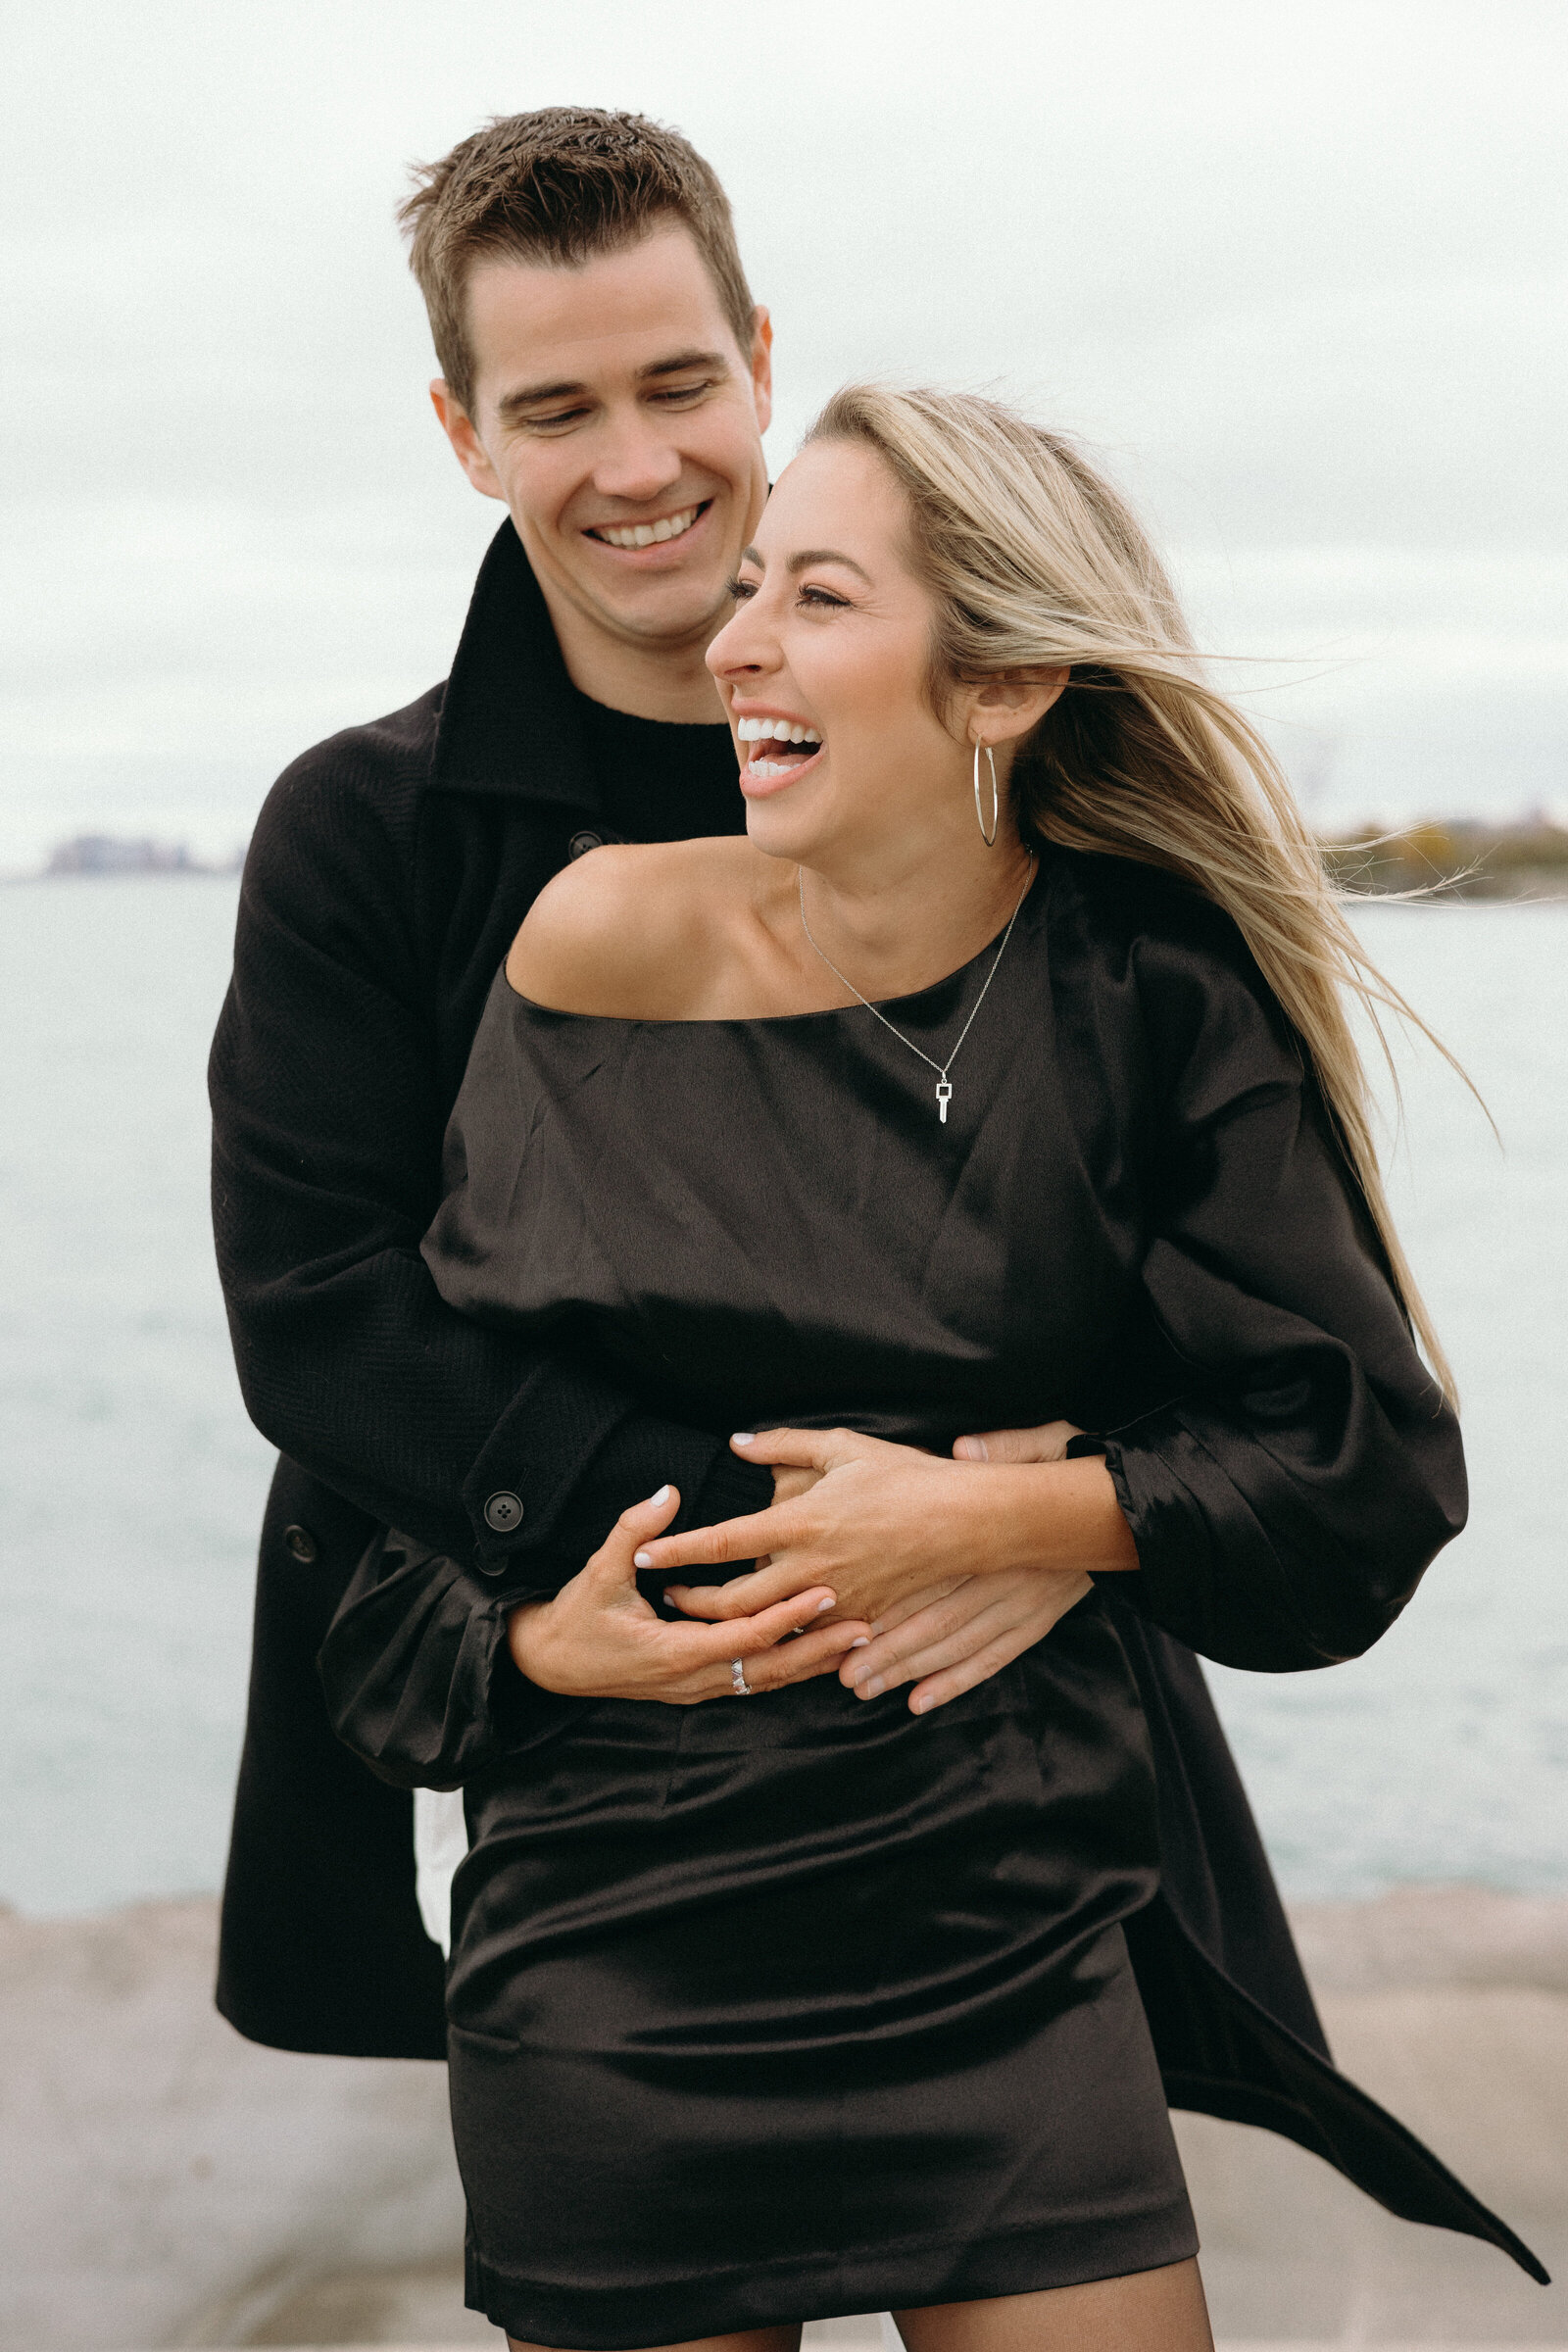 Z Photo and Film - Cody and Silvana - Chicago Engagement Shoot